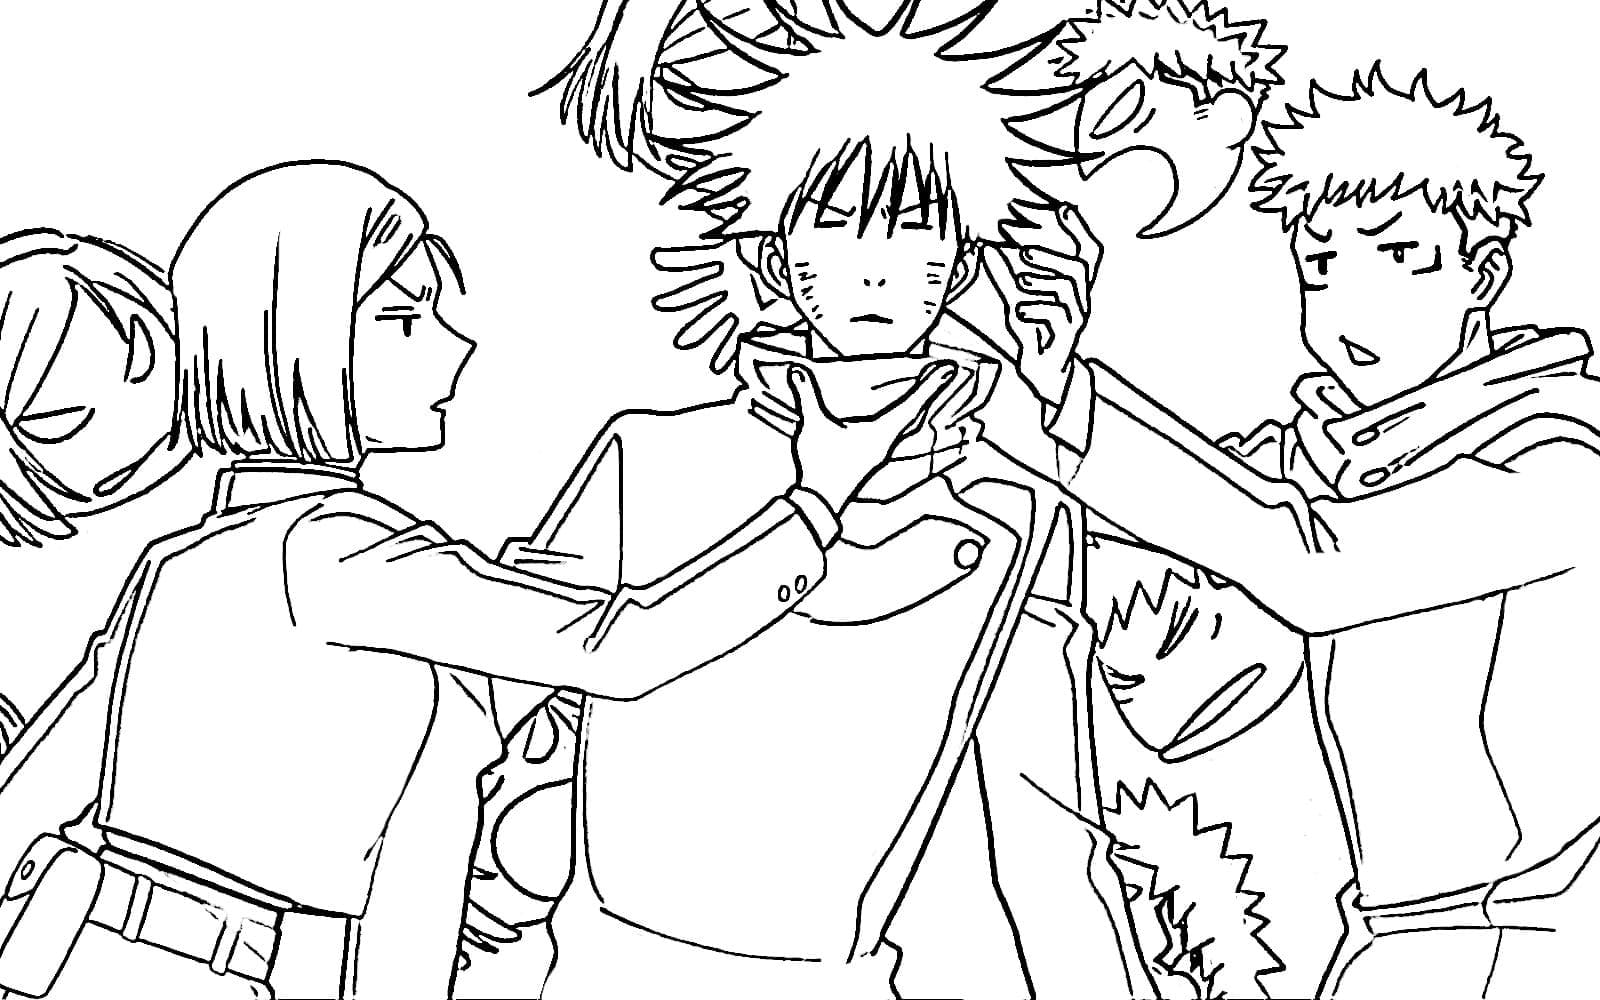 Itadori and Sukuna Coloring Page - Free Printable Coloring Pages for Kids